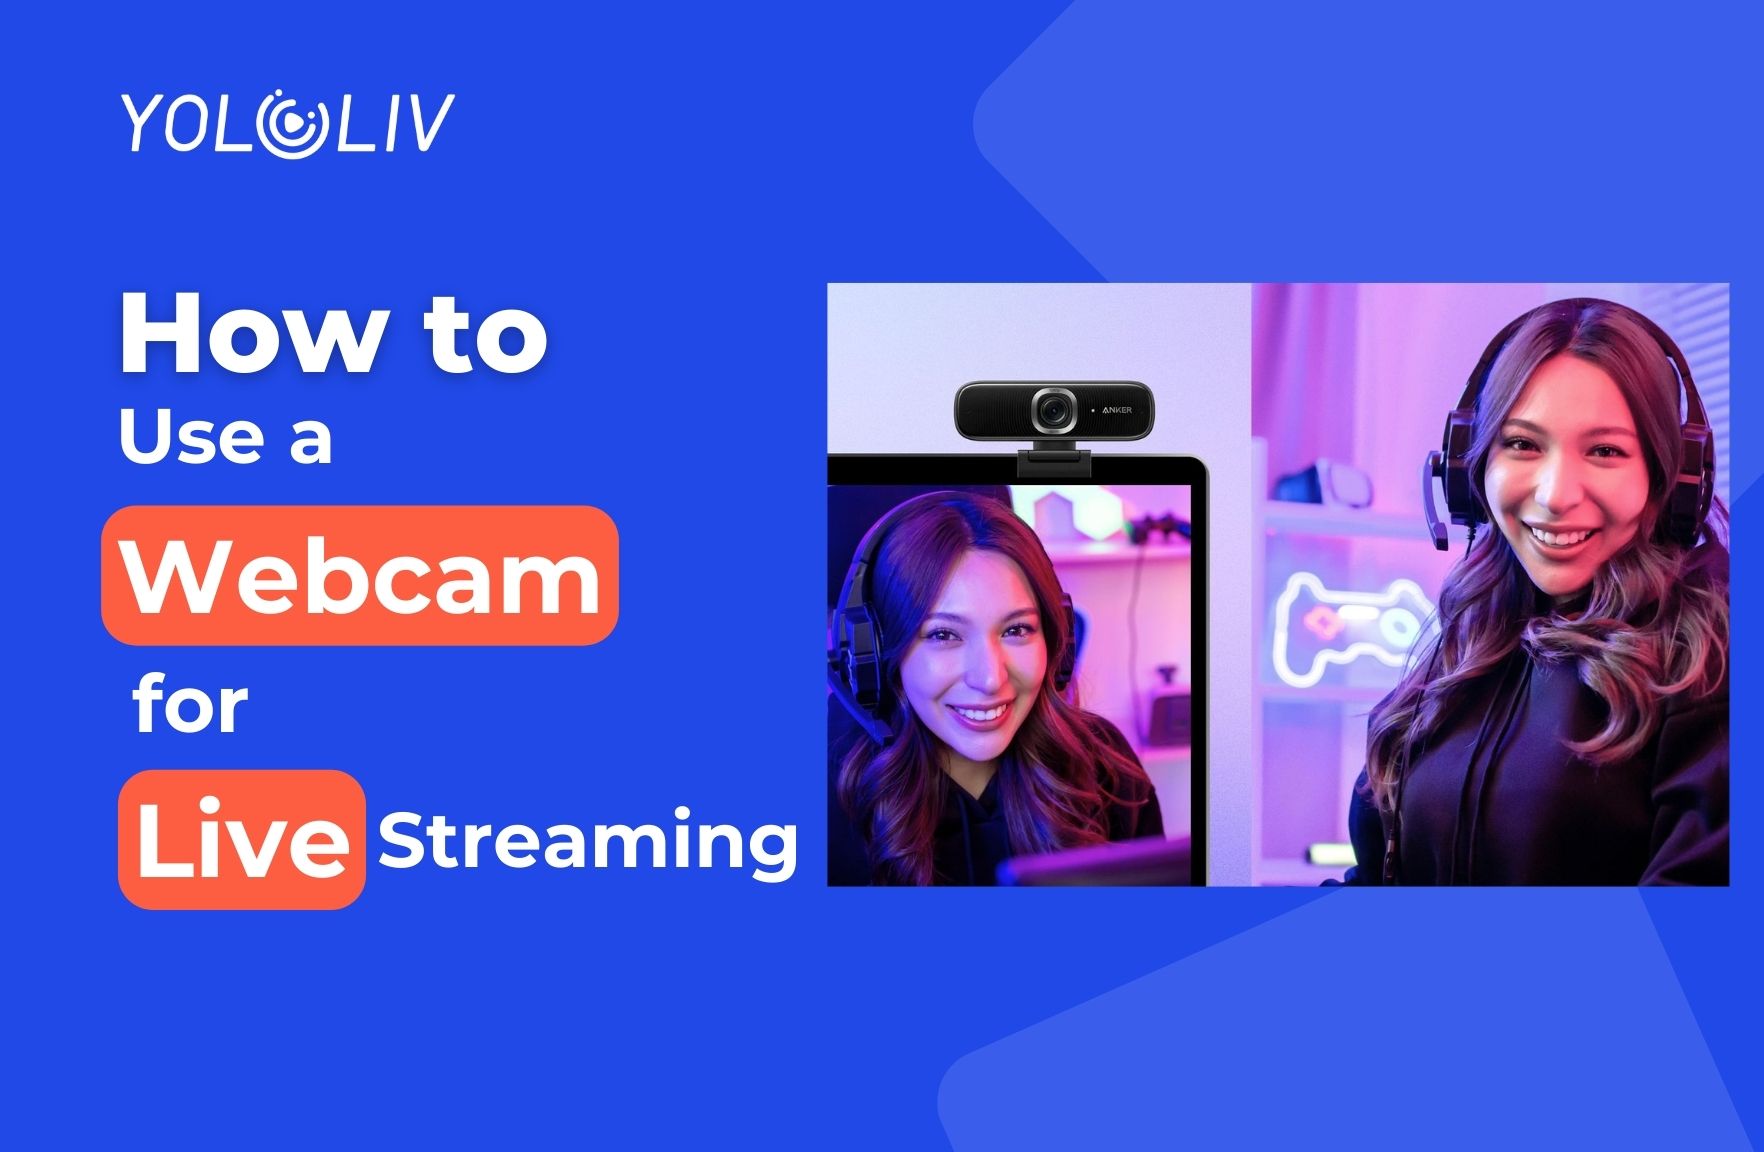 How to Use a Webcam for Live Streaming?